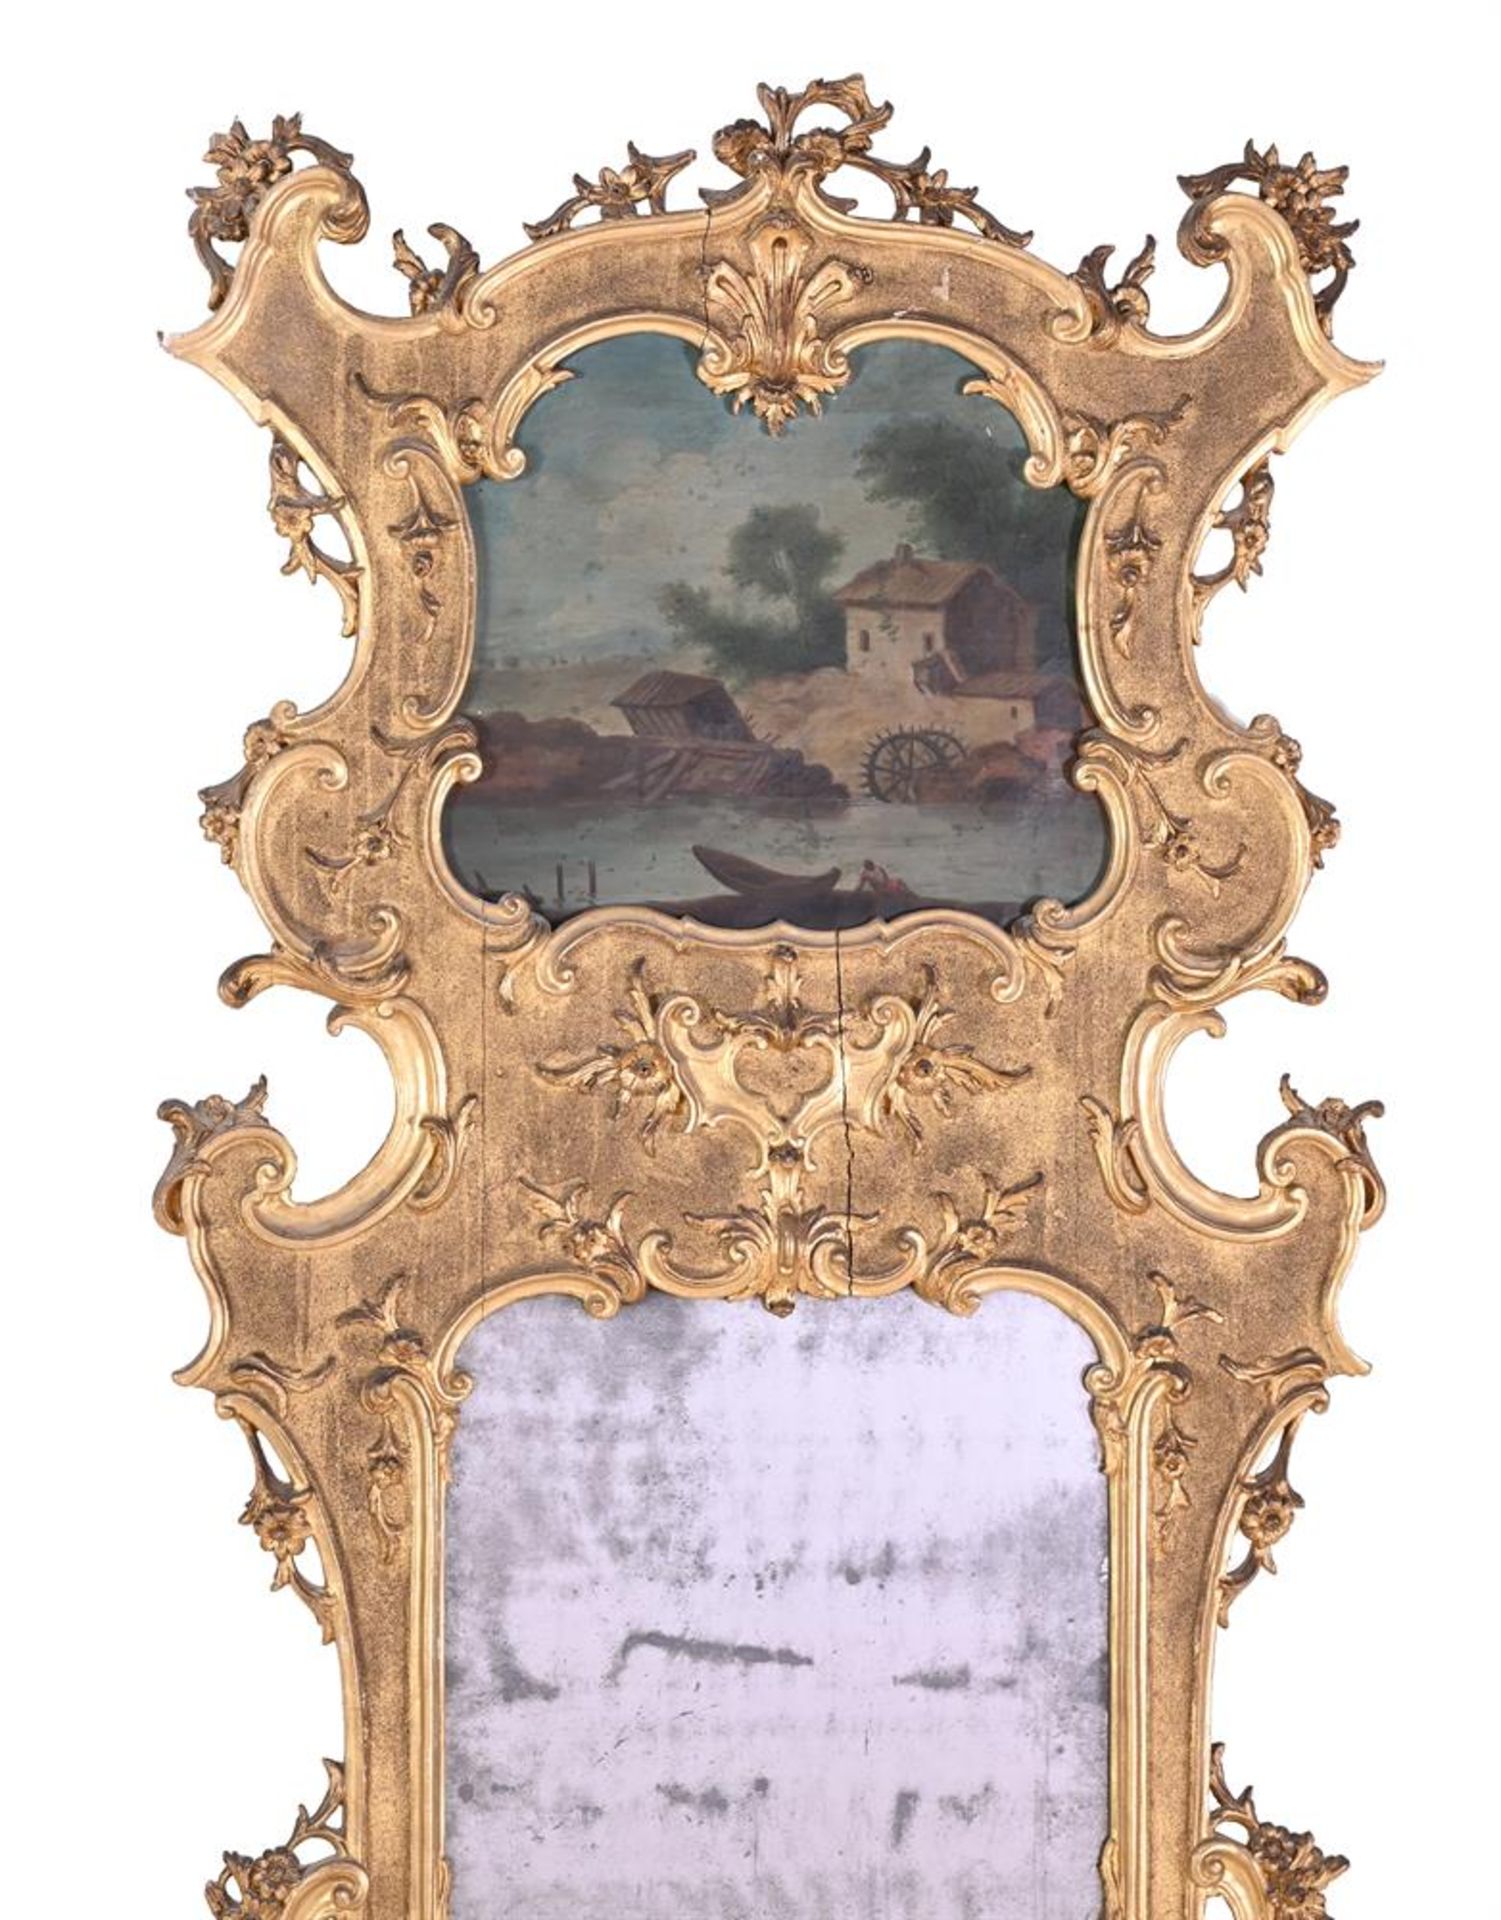 A PAIR OF ITALIAN CARVED GILTWOOD TRUMEAU MIRRORS, 19TH CENTURY - Image 4 of 7